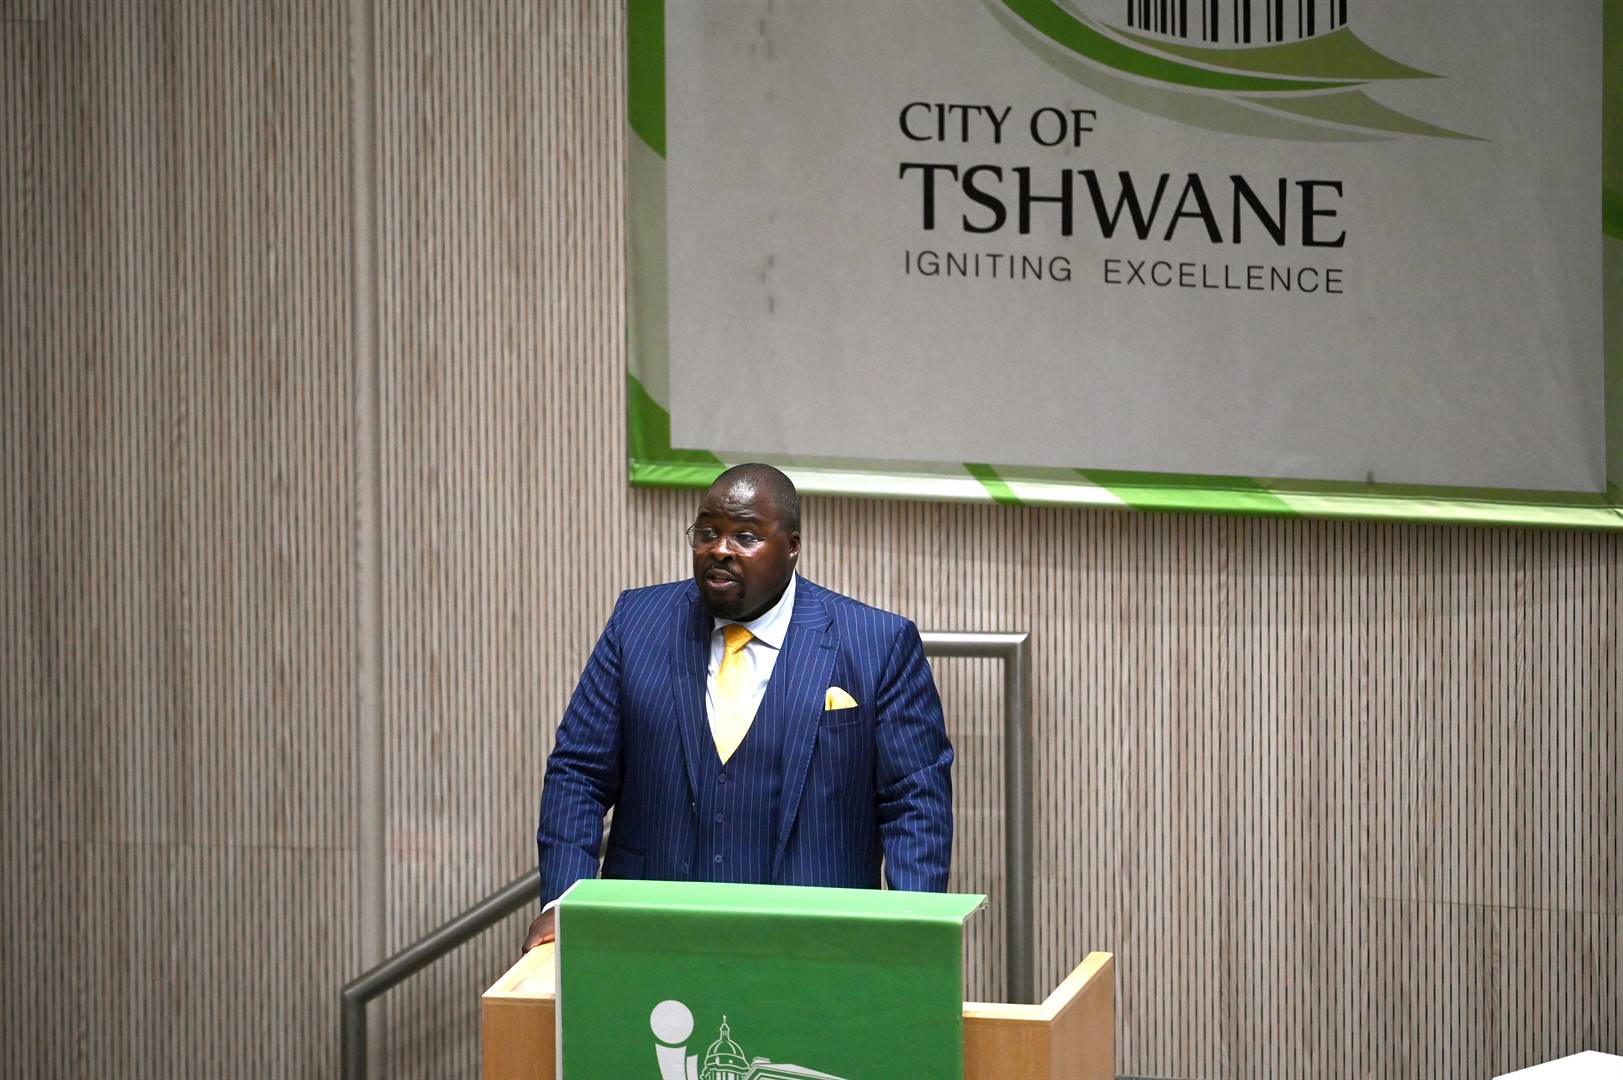 City of Tshwane councillors paid tribute to the late former mayor Murunwa Makwarela on Thursday, but it was not without howling at each other. (Deaan Vivier/Gallo Images)